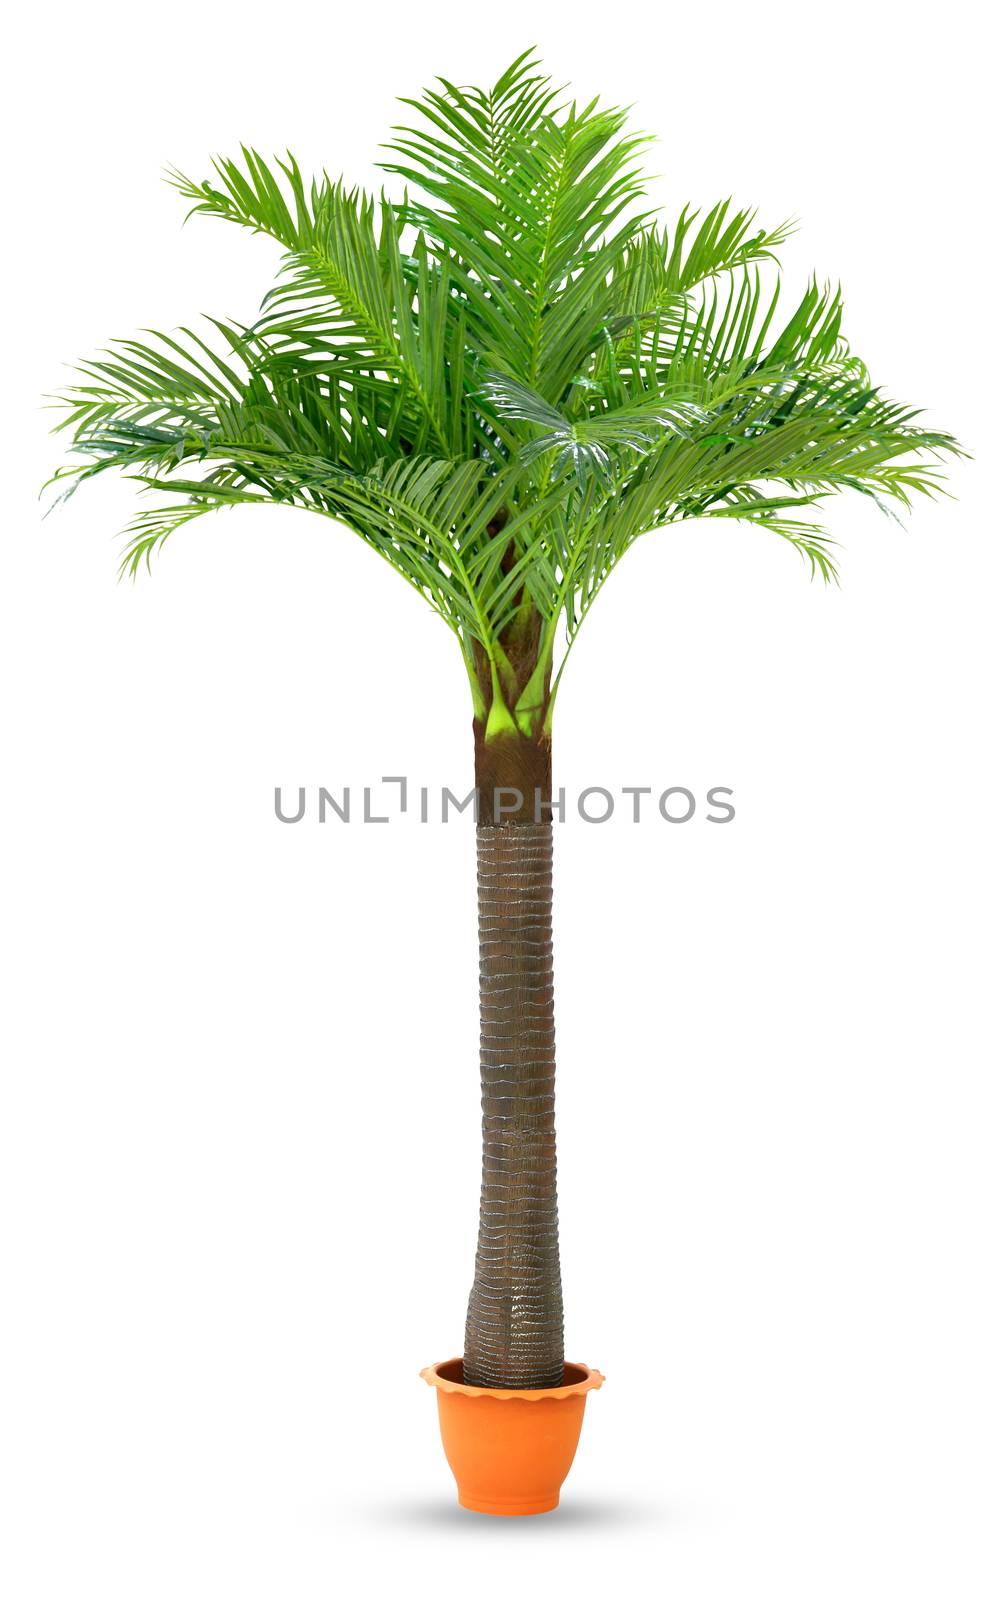 Coconut palm tree in pot plastic isolated white background, Coconut tree for decoration booth exhibitions prop display garden design